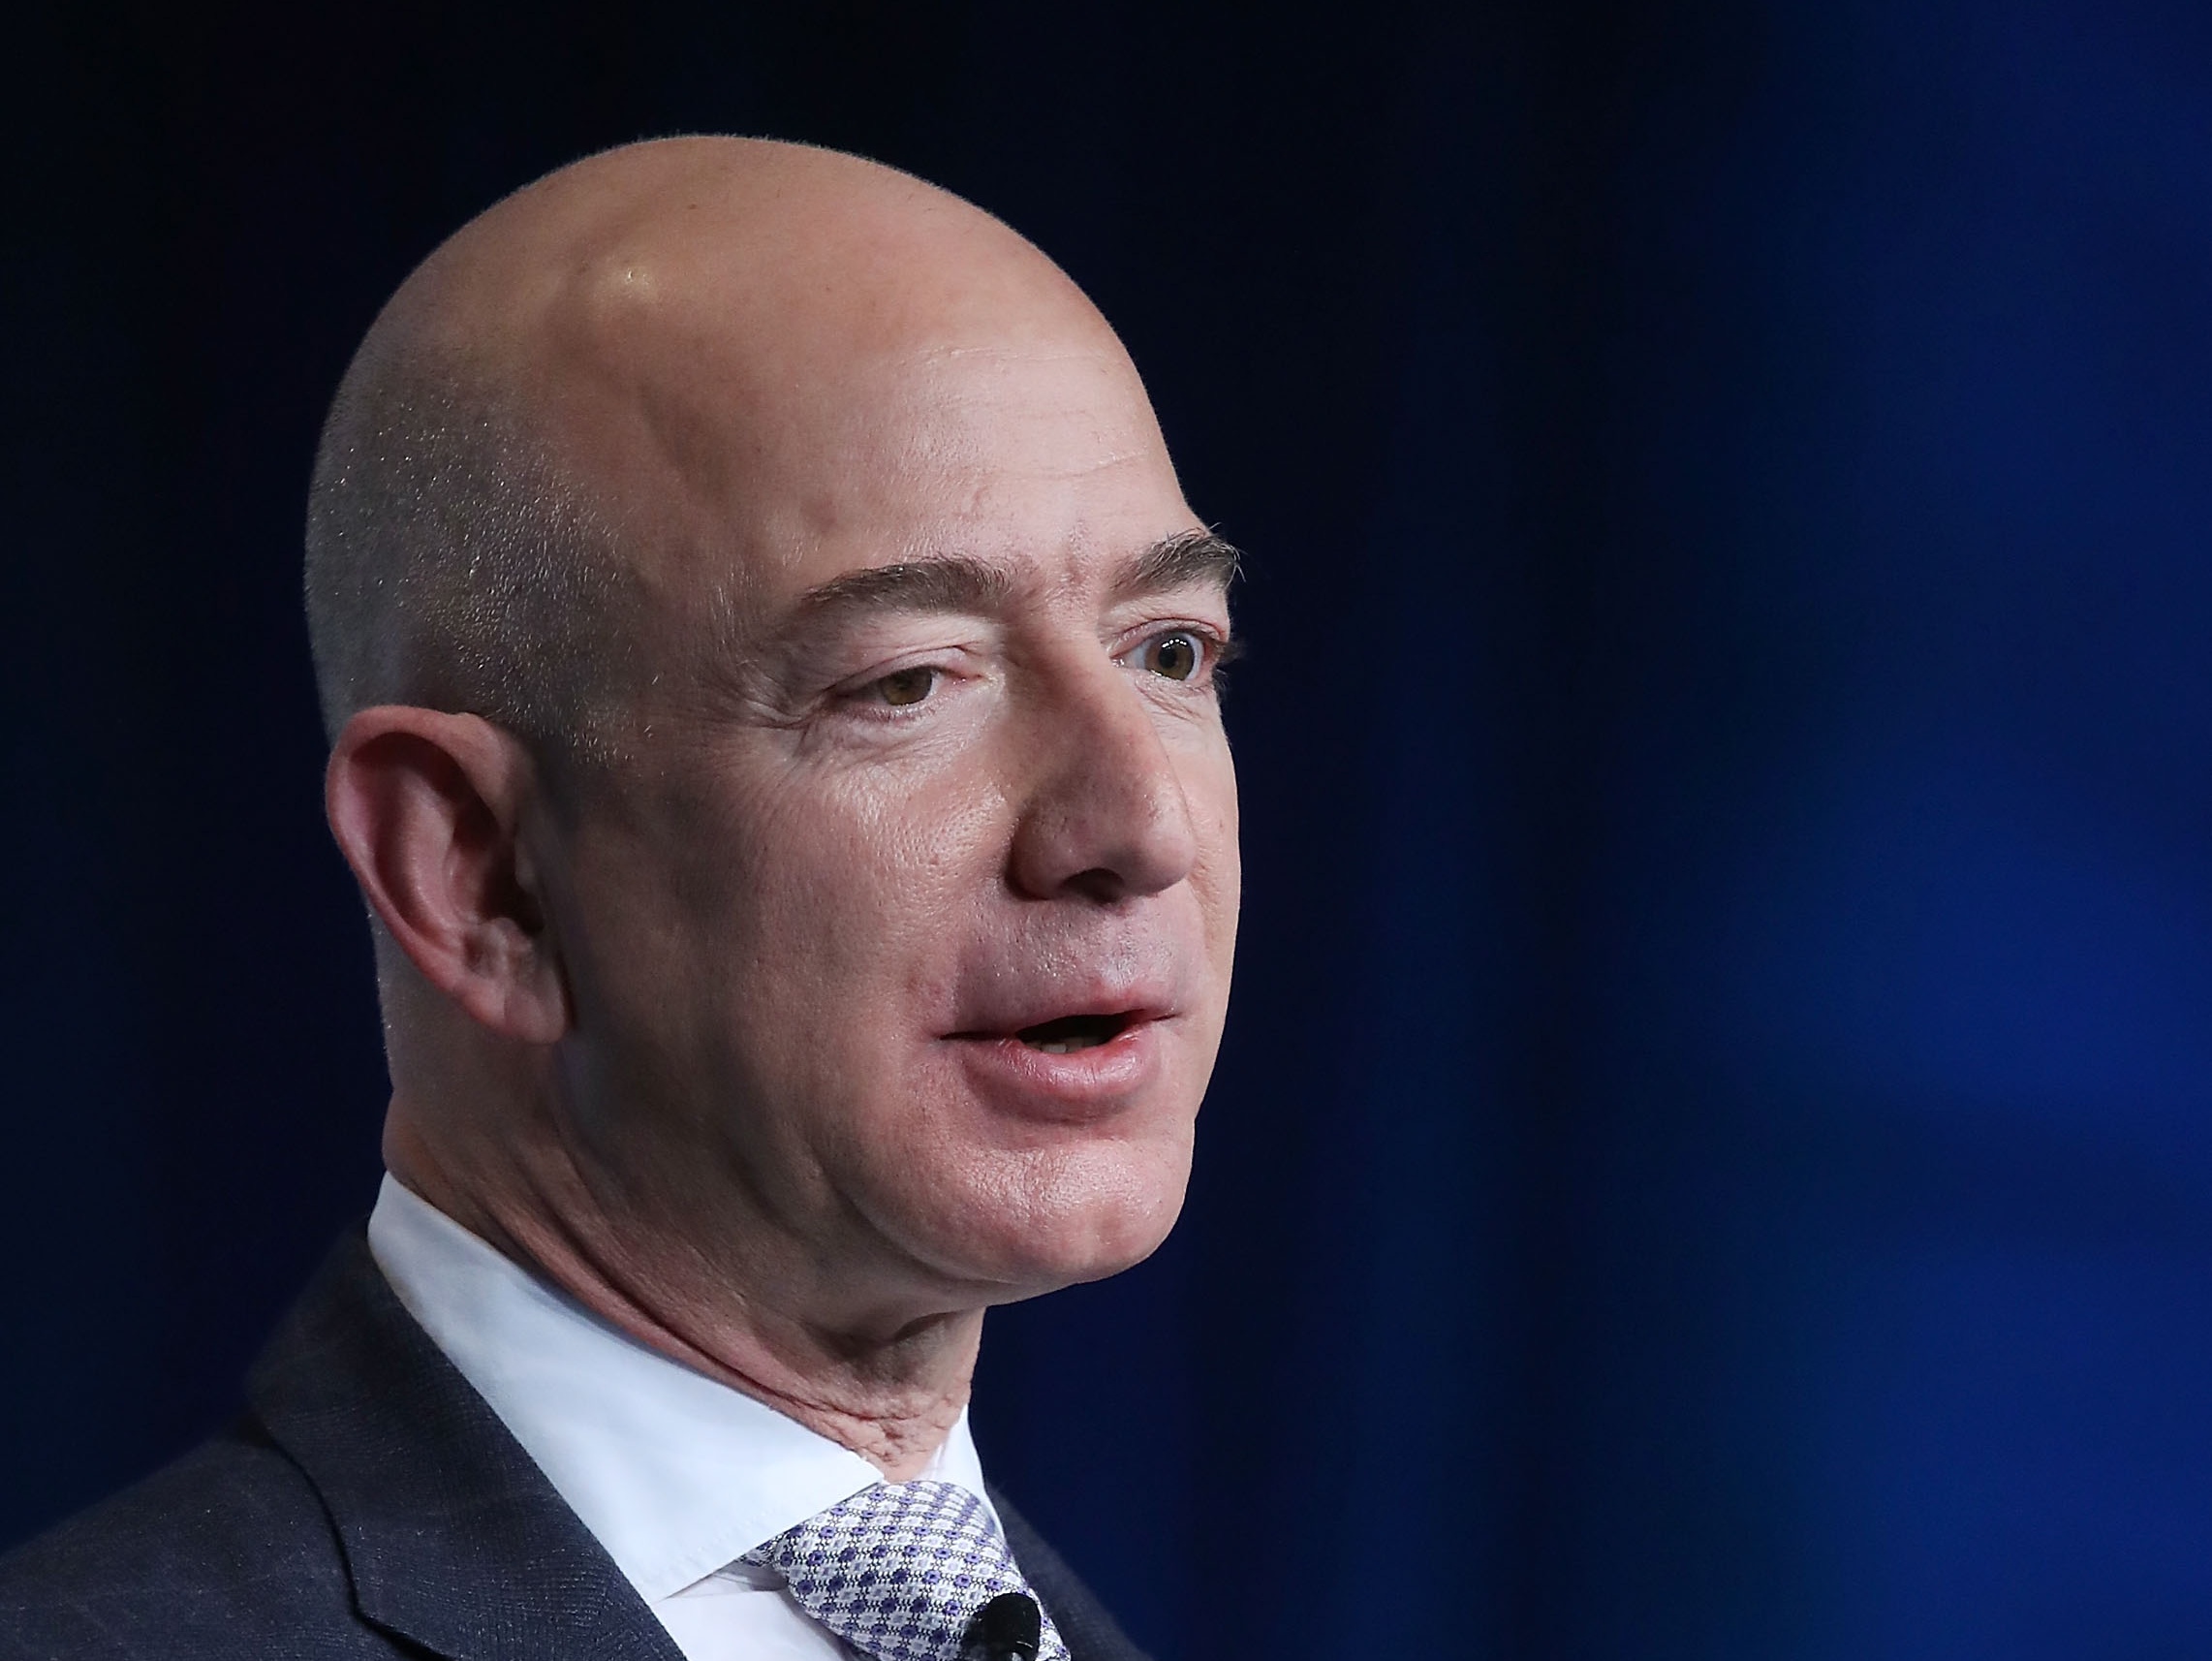 Amazon CEO highlights the importance of AI | SmartBrief